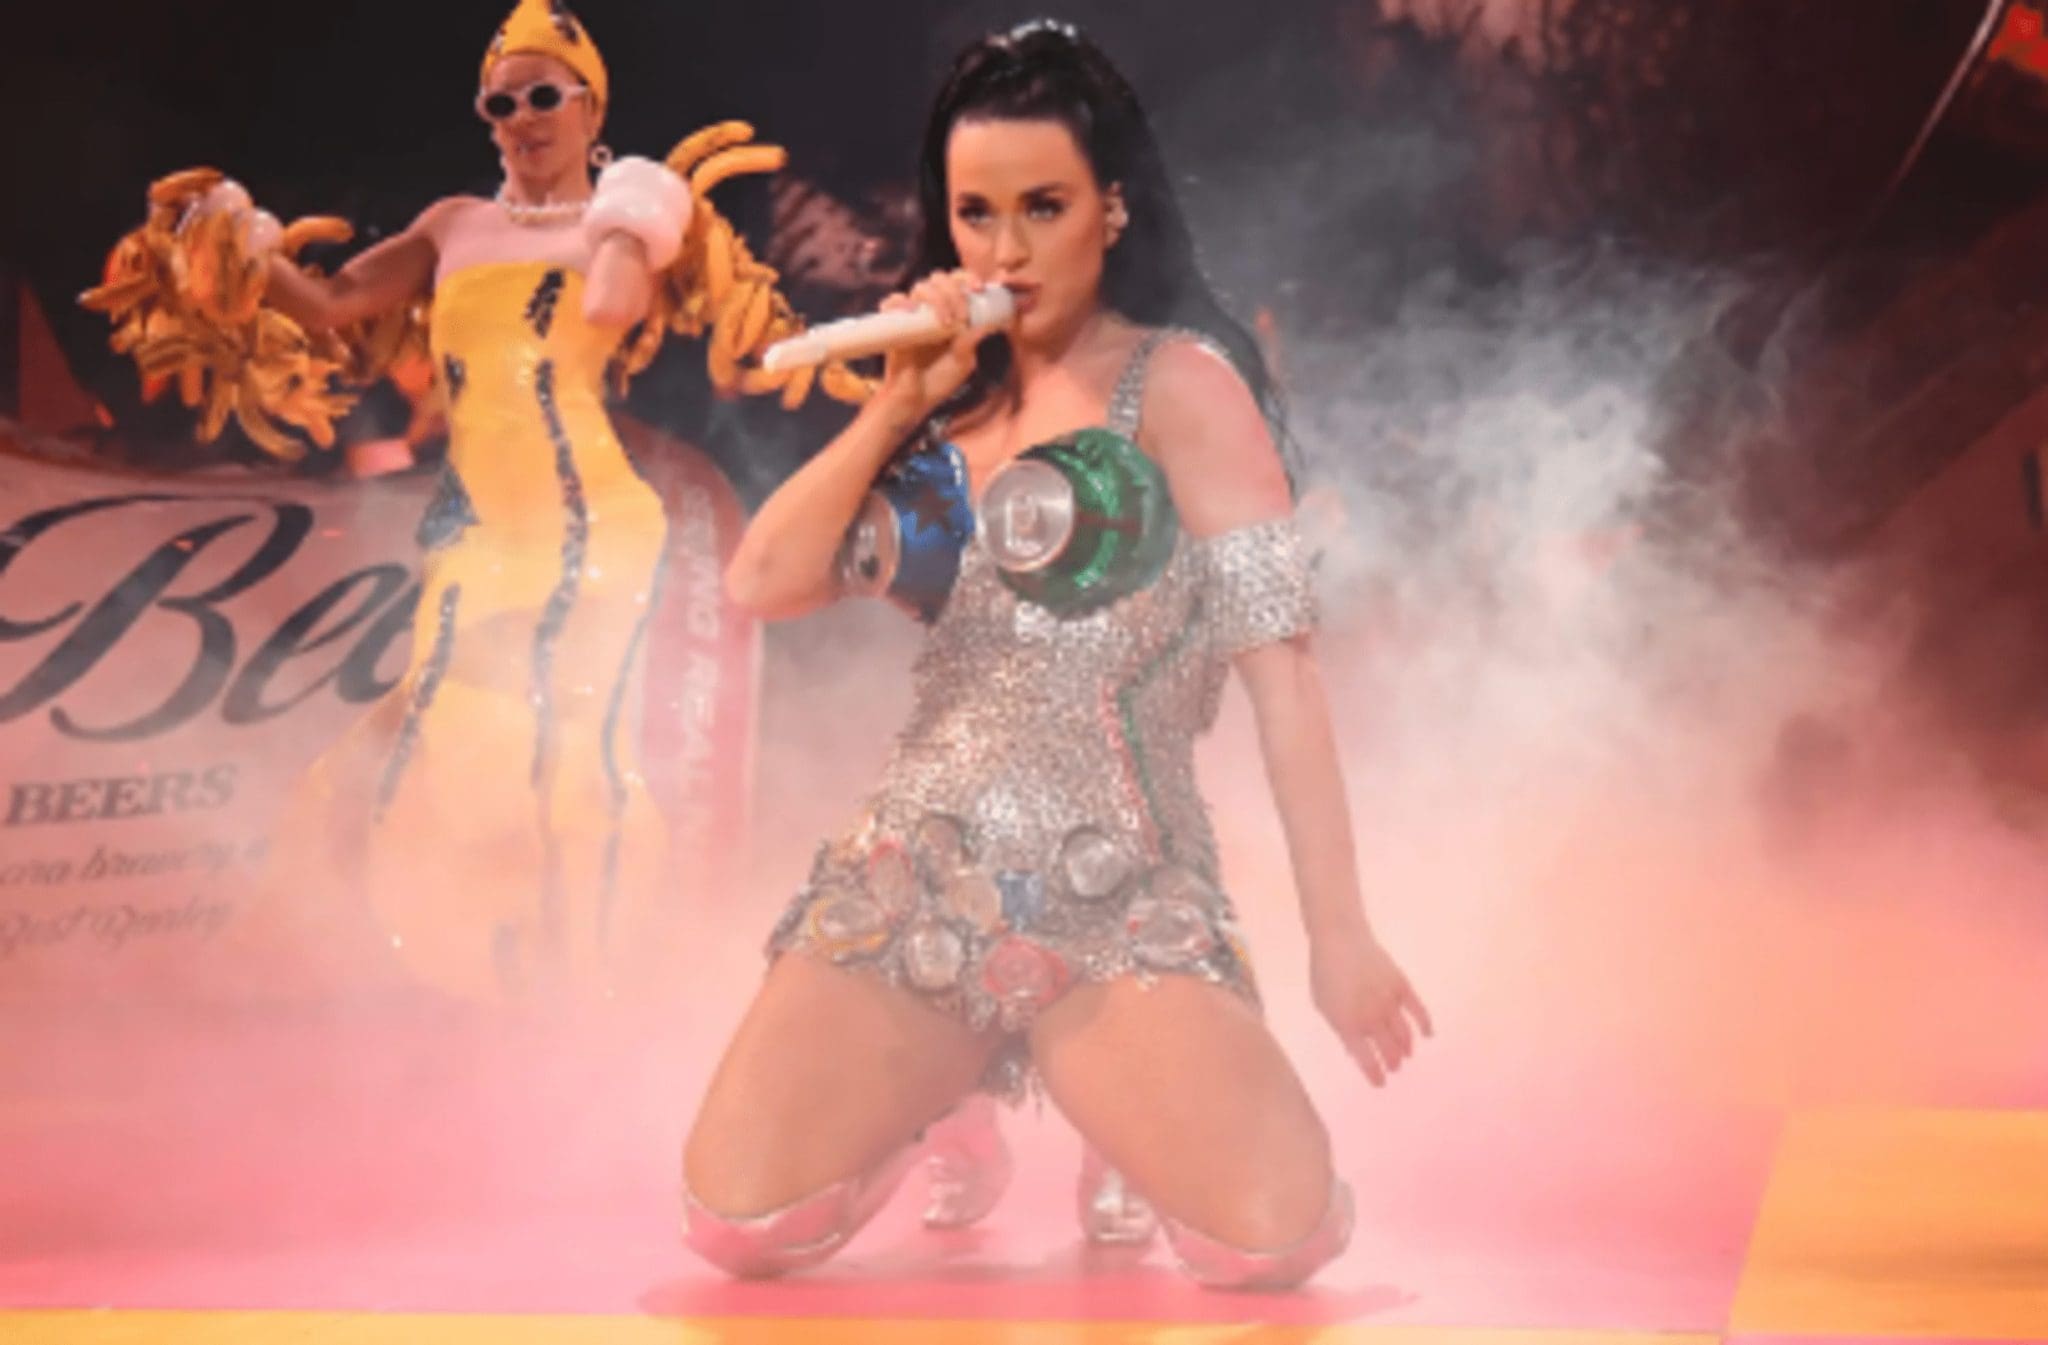 Katy Perry claimed that the eye-glitch that made the rounds was an act.